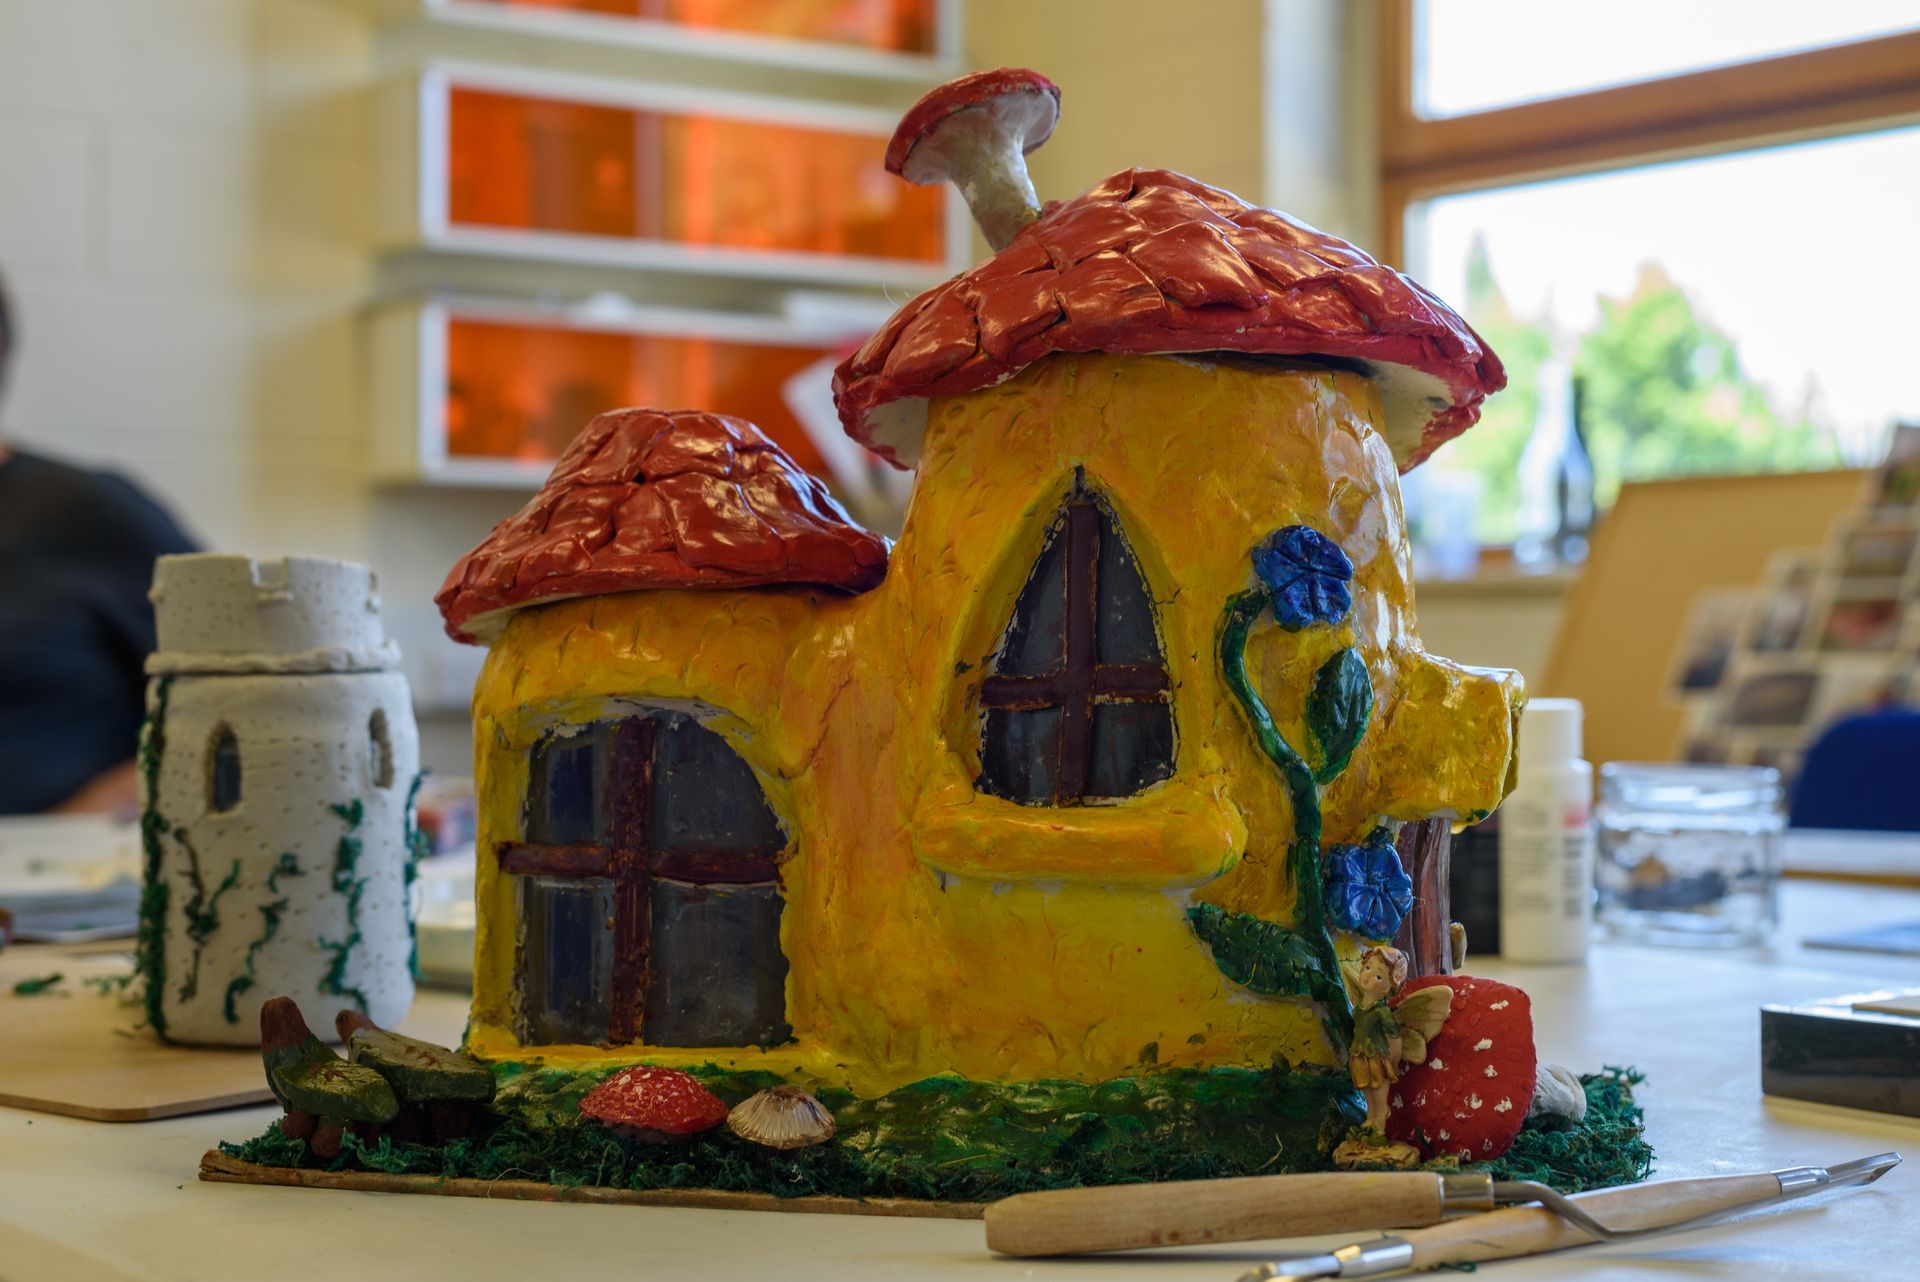 Ceramic model house from Kindred Minds course